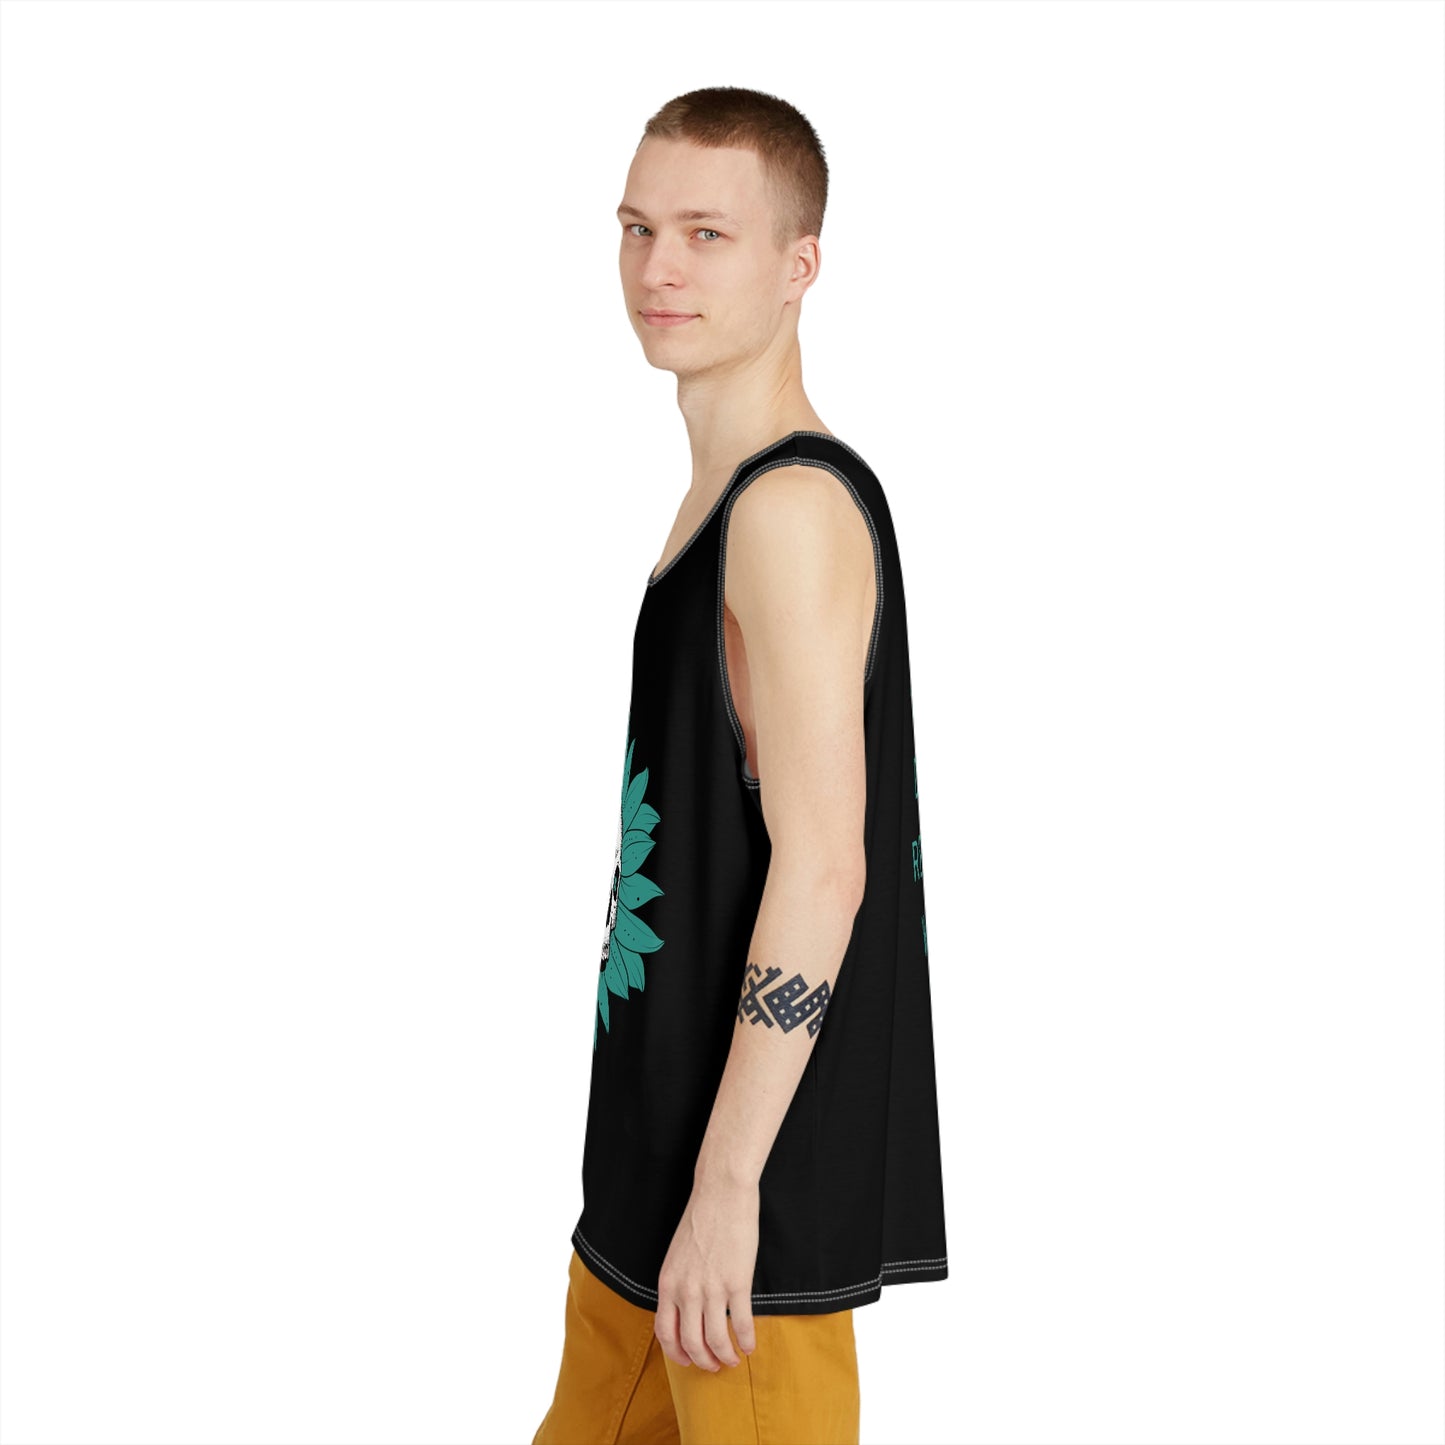 Live. Die. Return Home. Loungy Tank